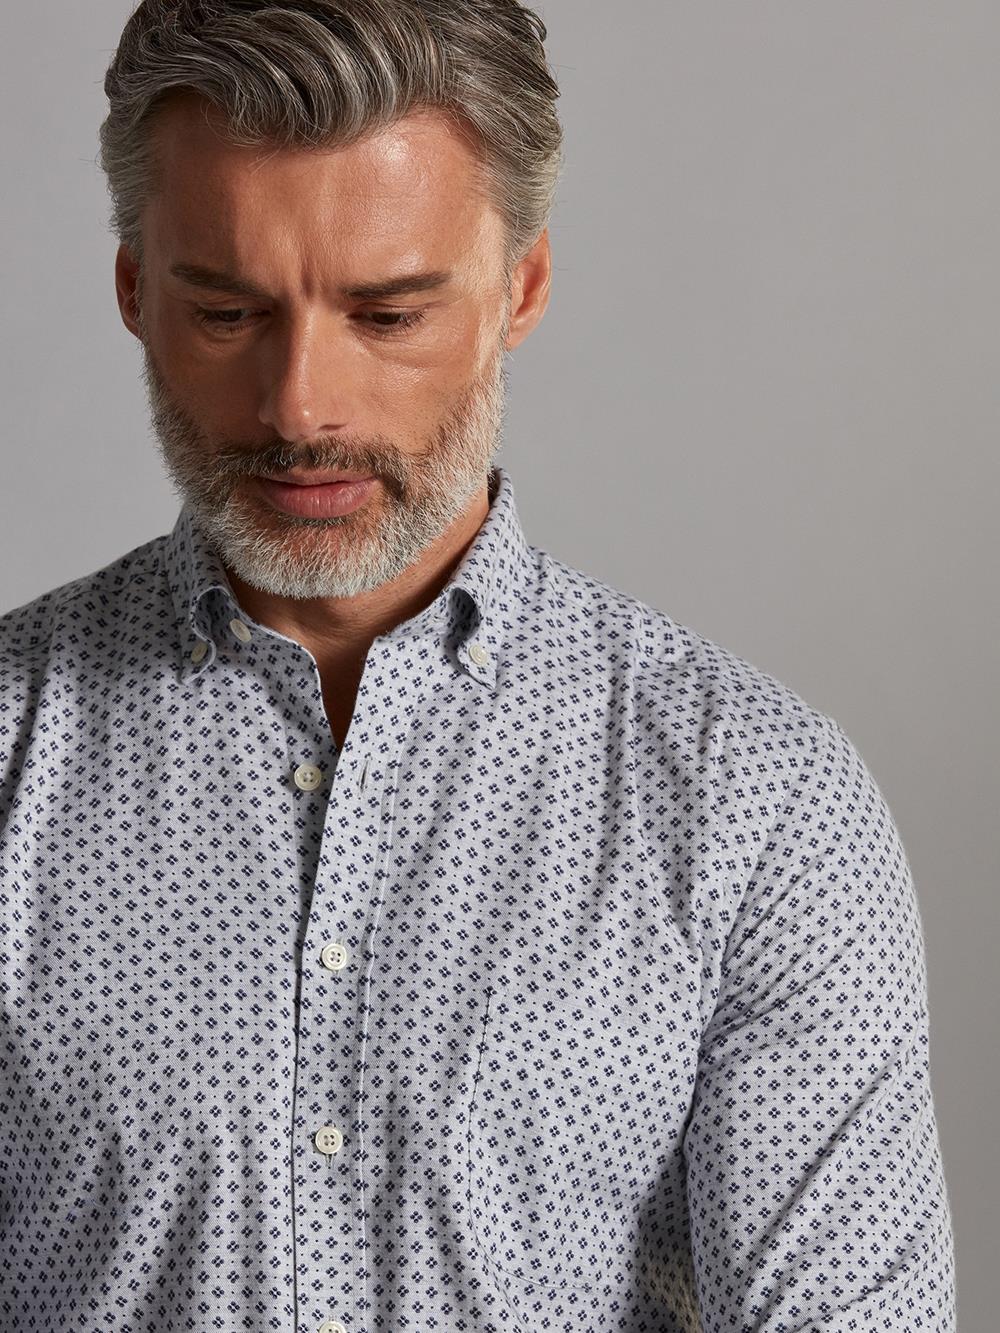 Nelson grey shirt with printed pattern - Button-down collar